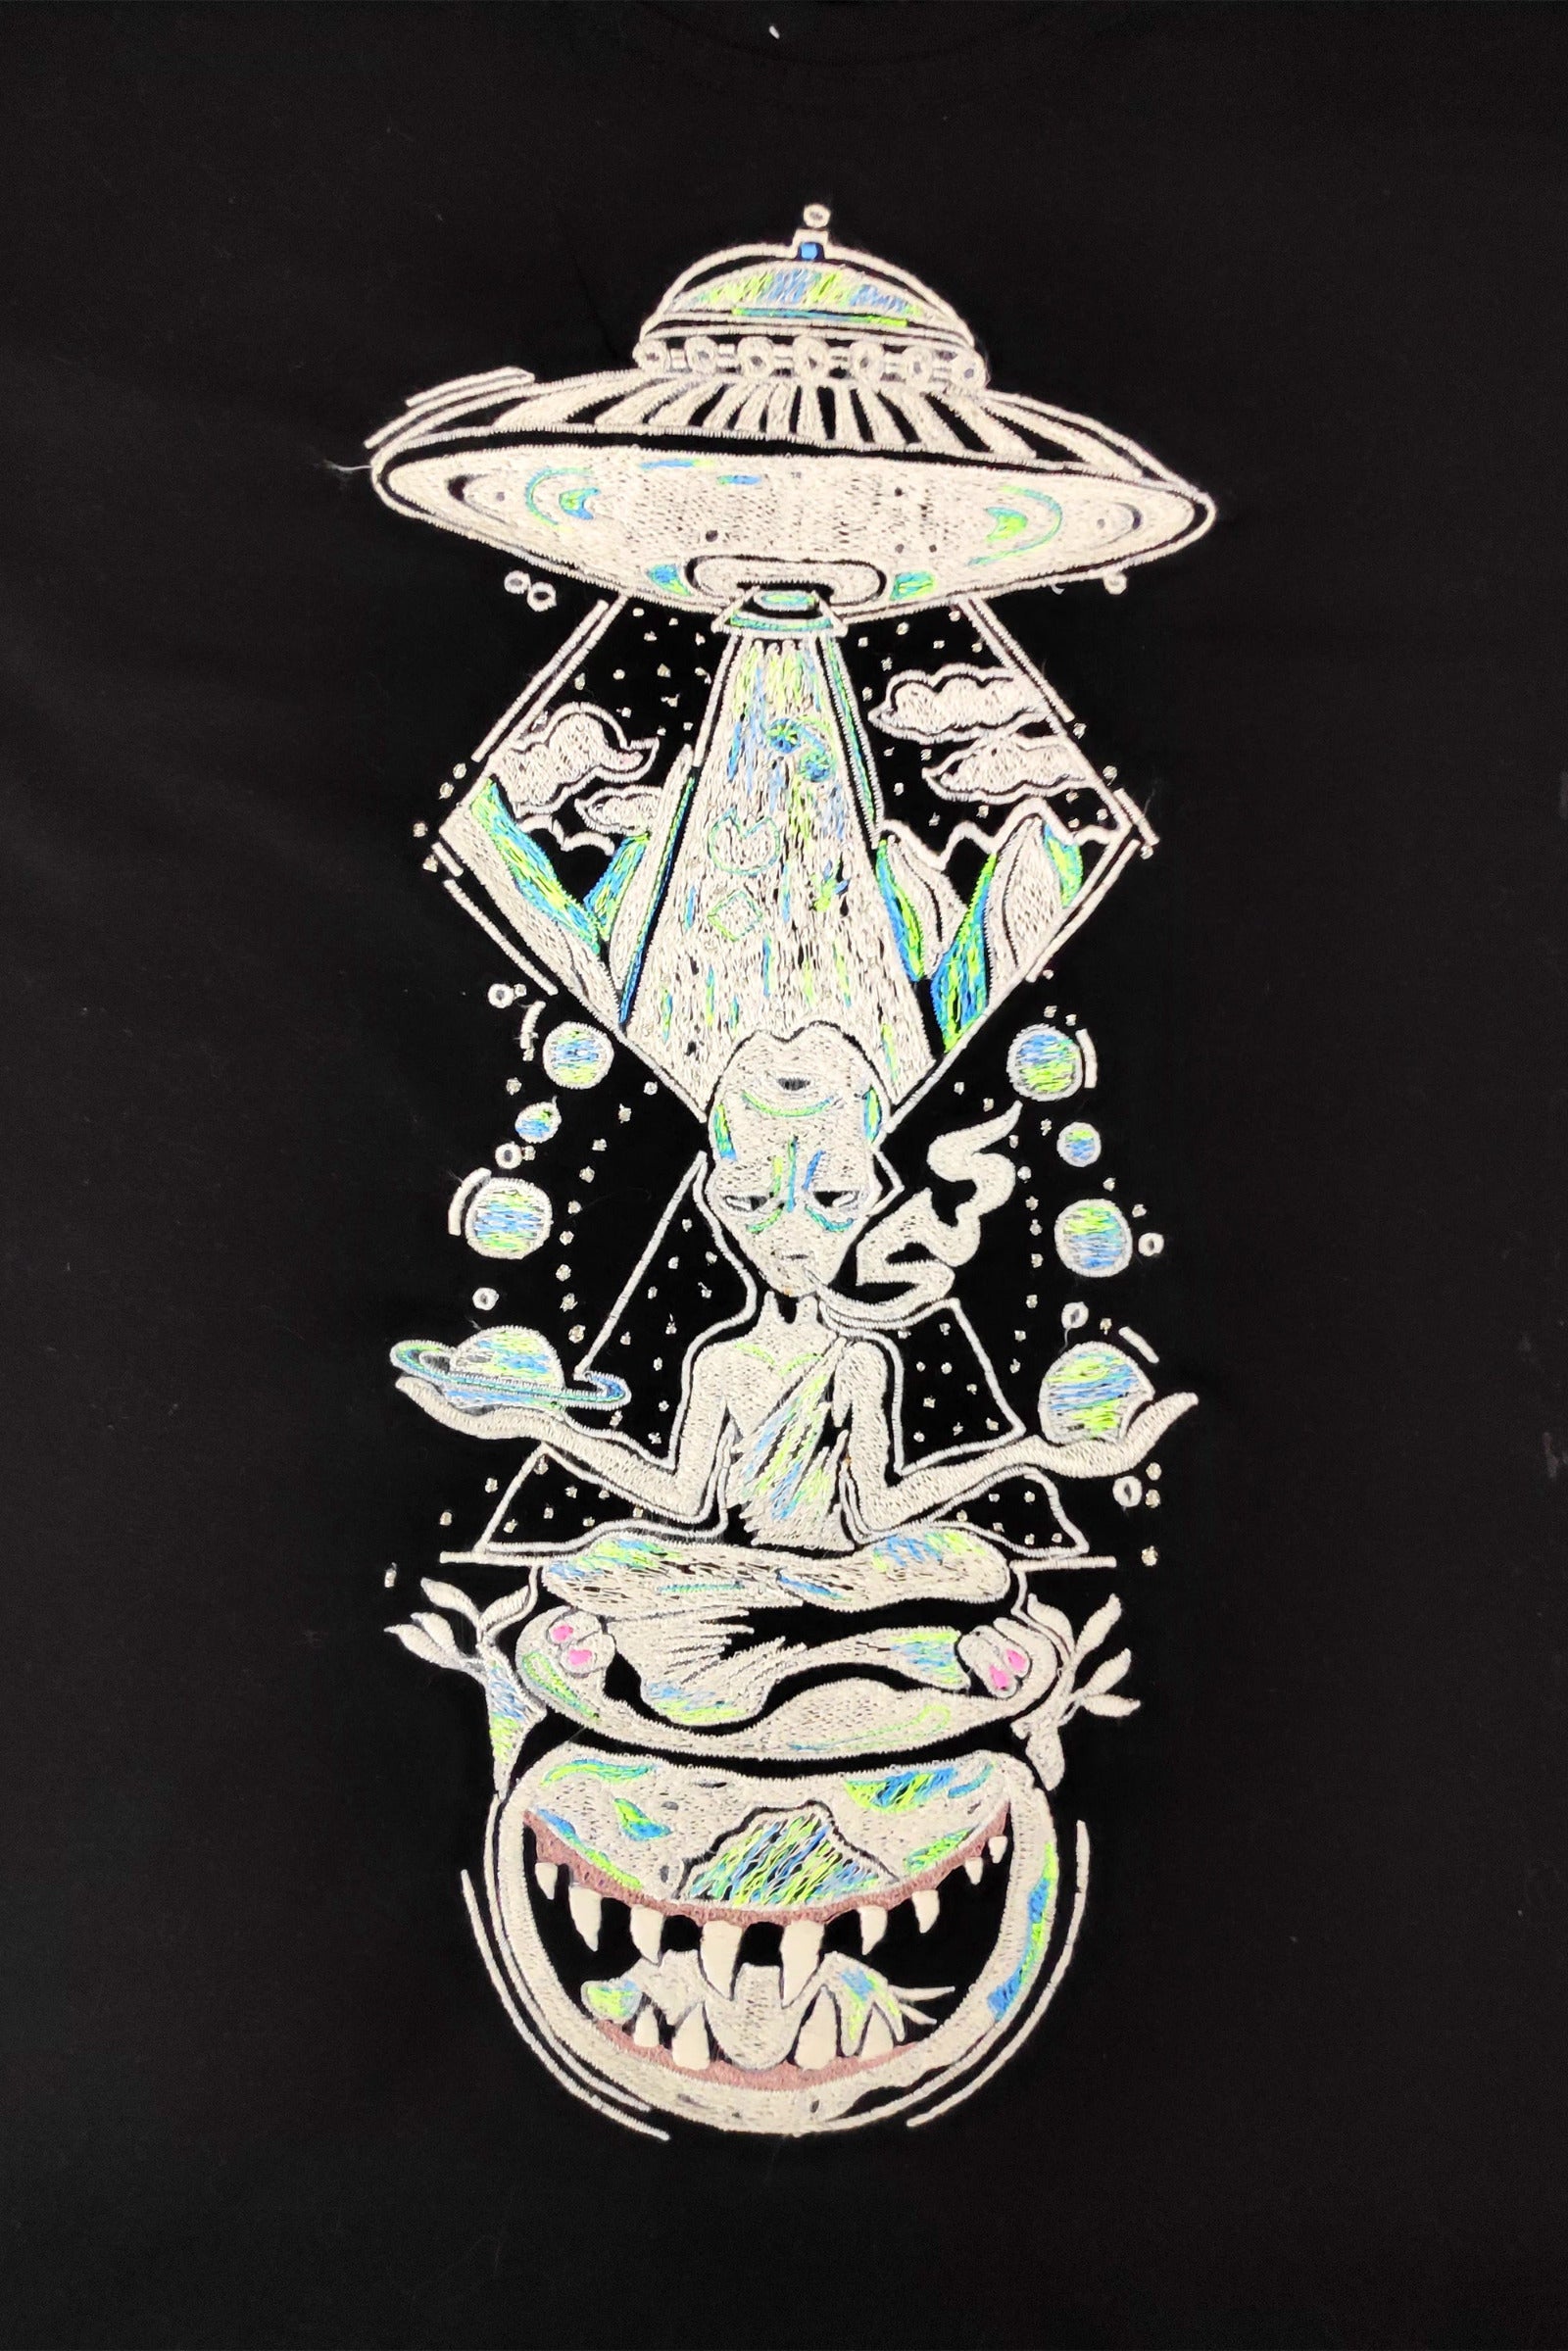 Space Trip Embroidered Artwork Half Sleeve Black T-shirt For Women